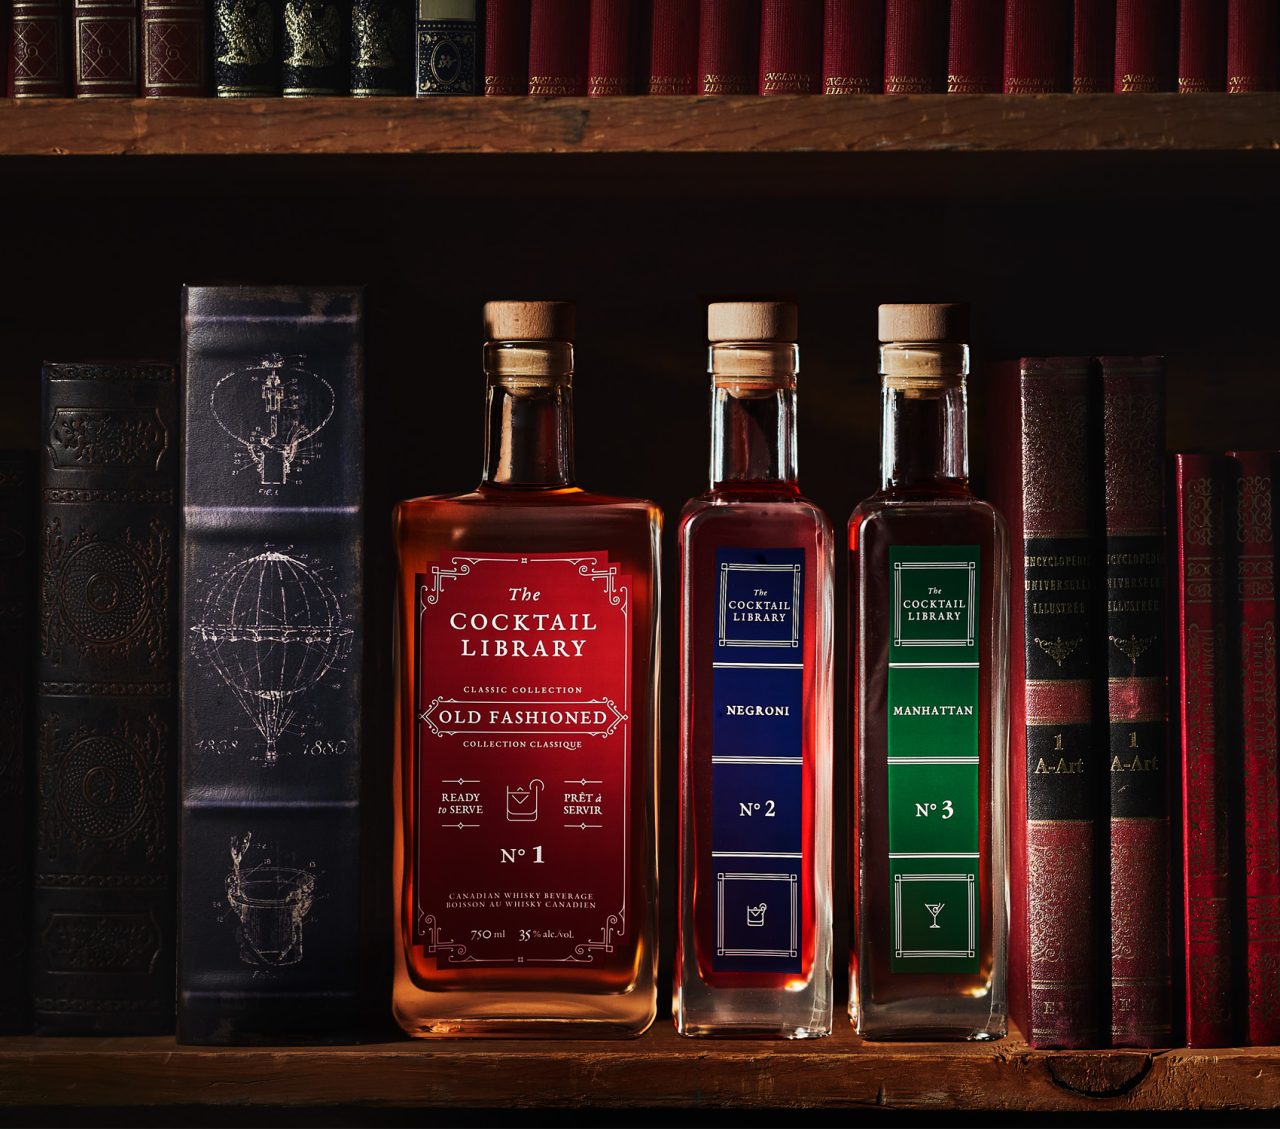 The Cocktail Library Packaging